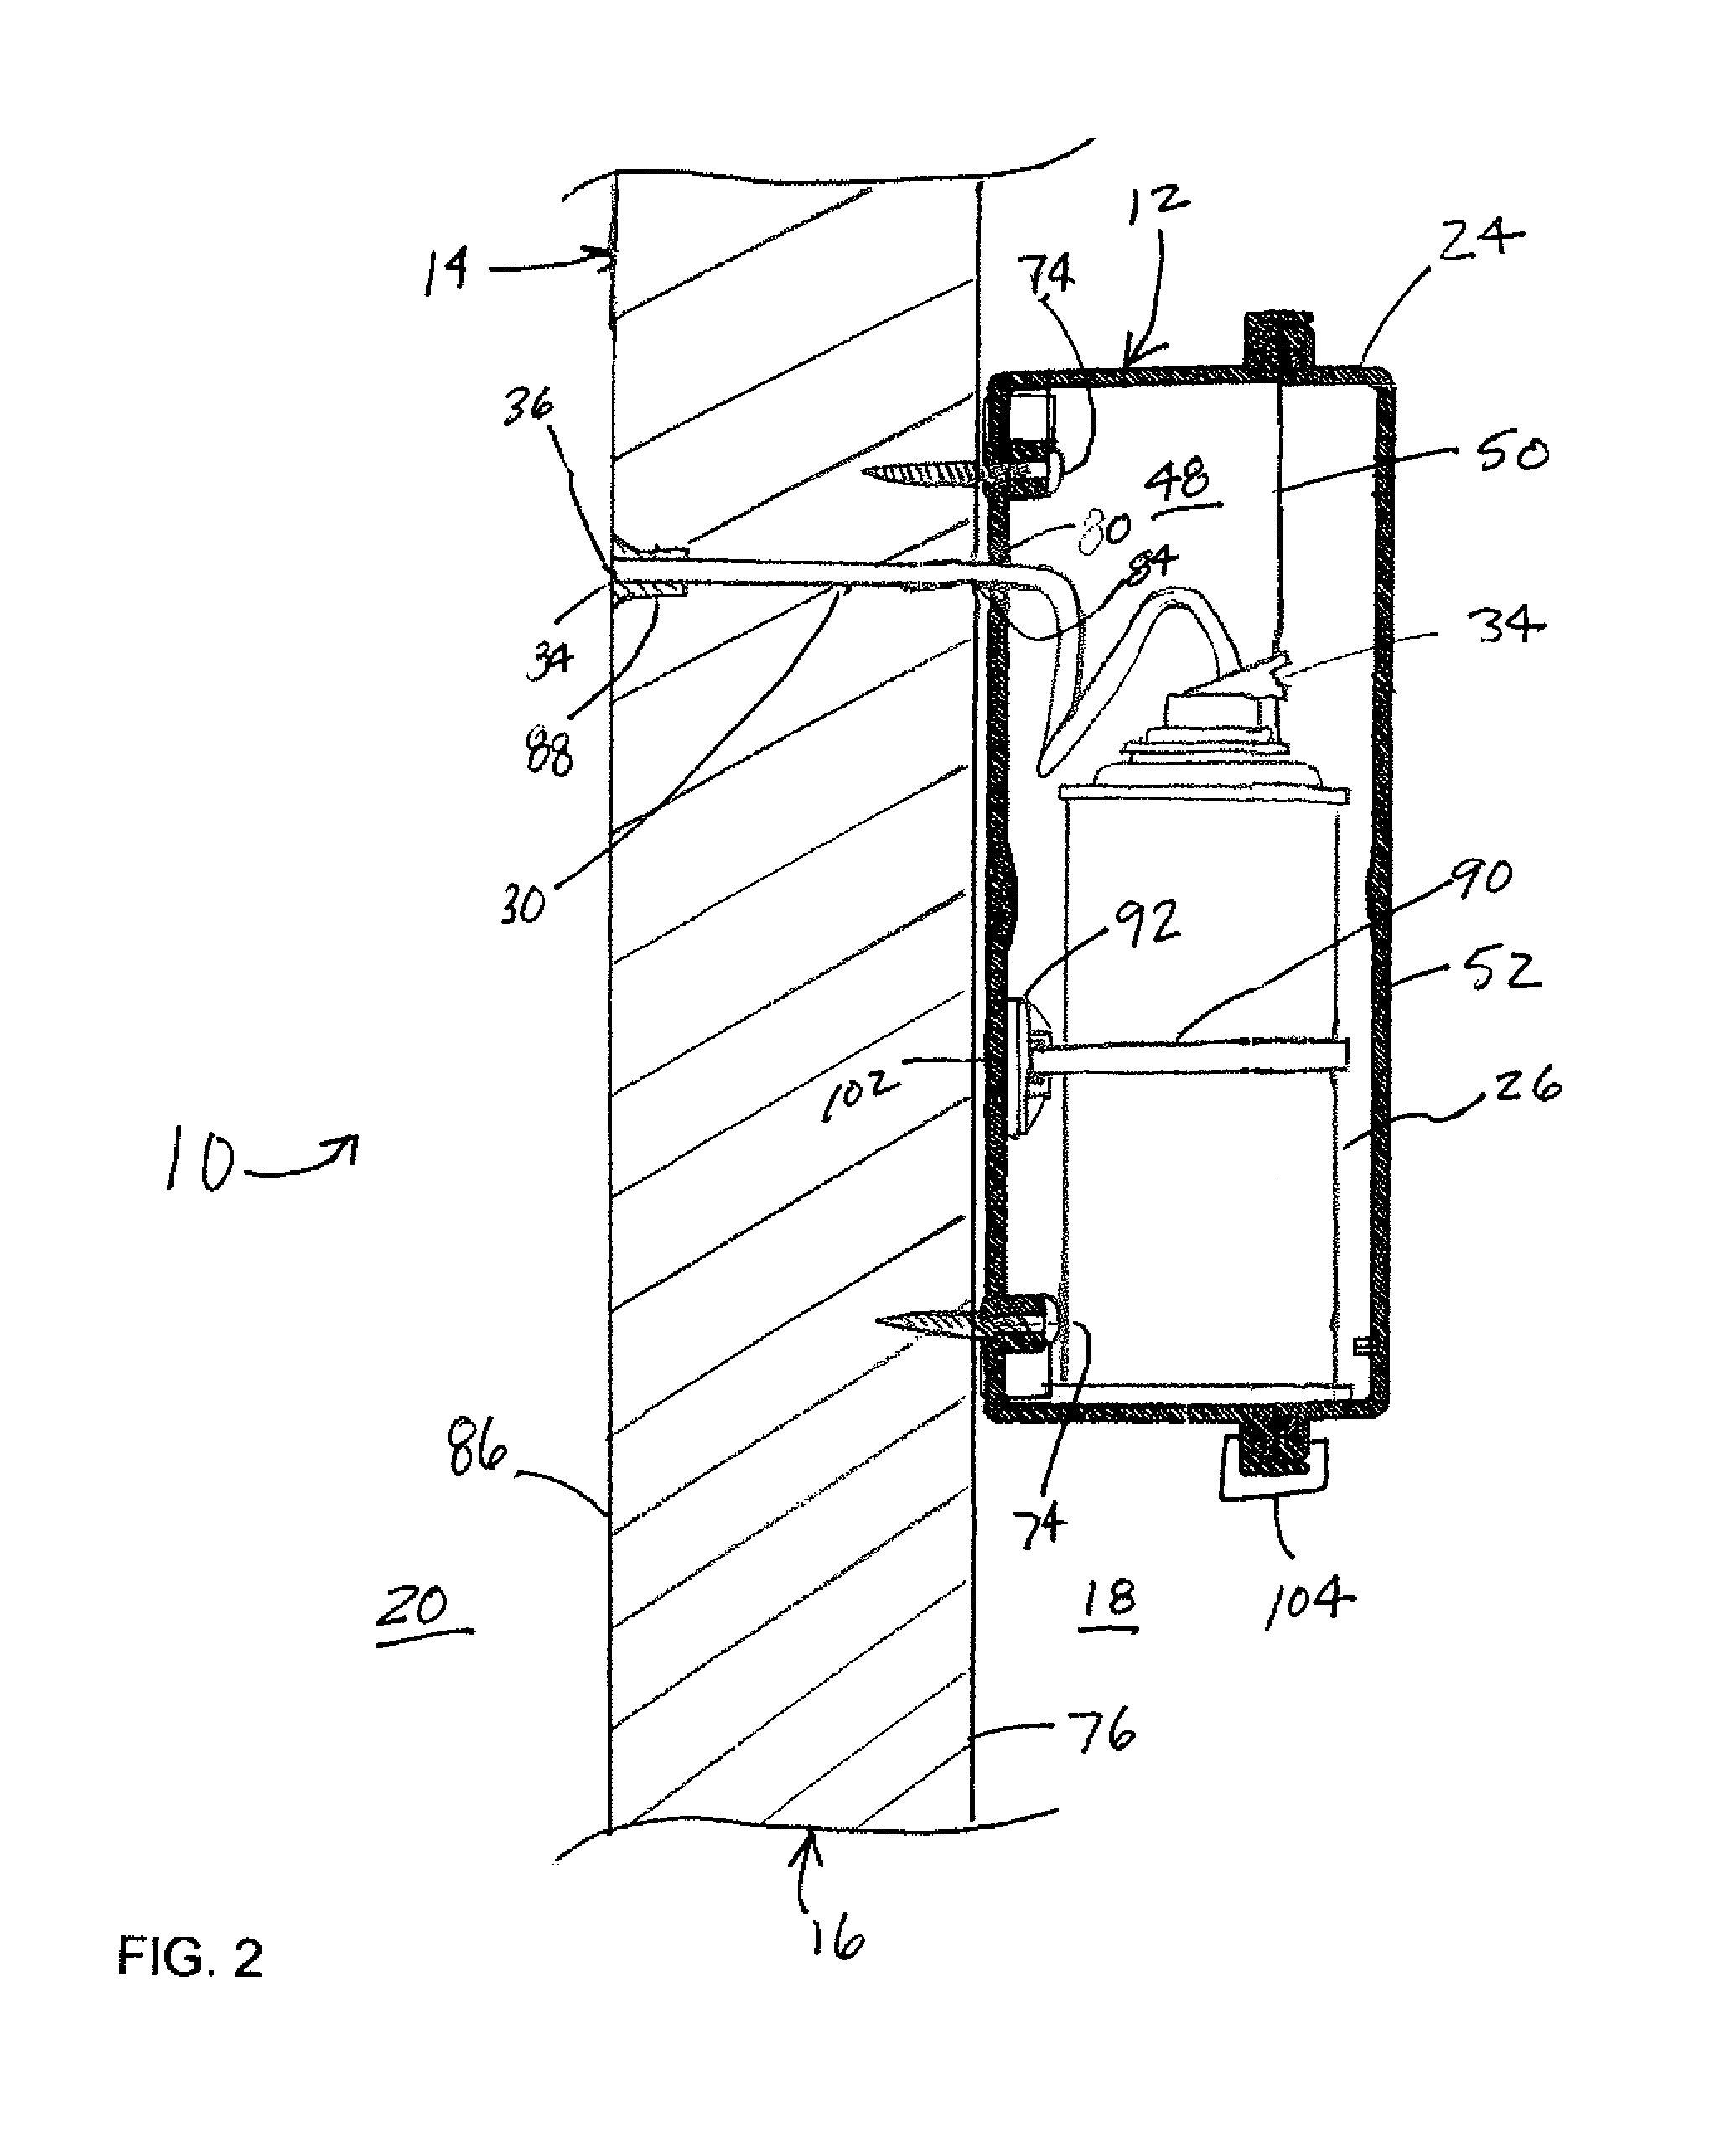 Wall-mounted nonlethal device for defending against intruders